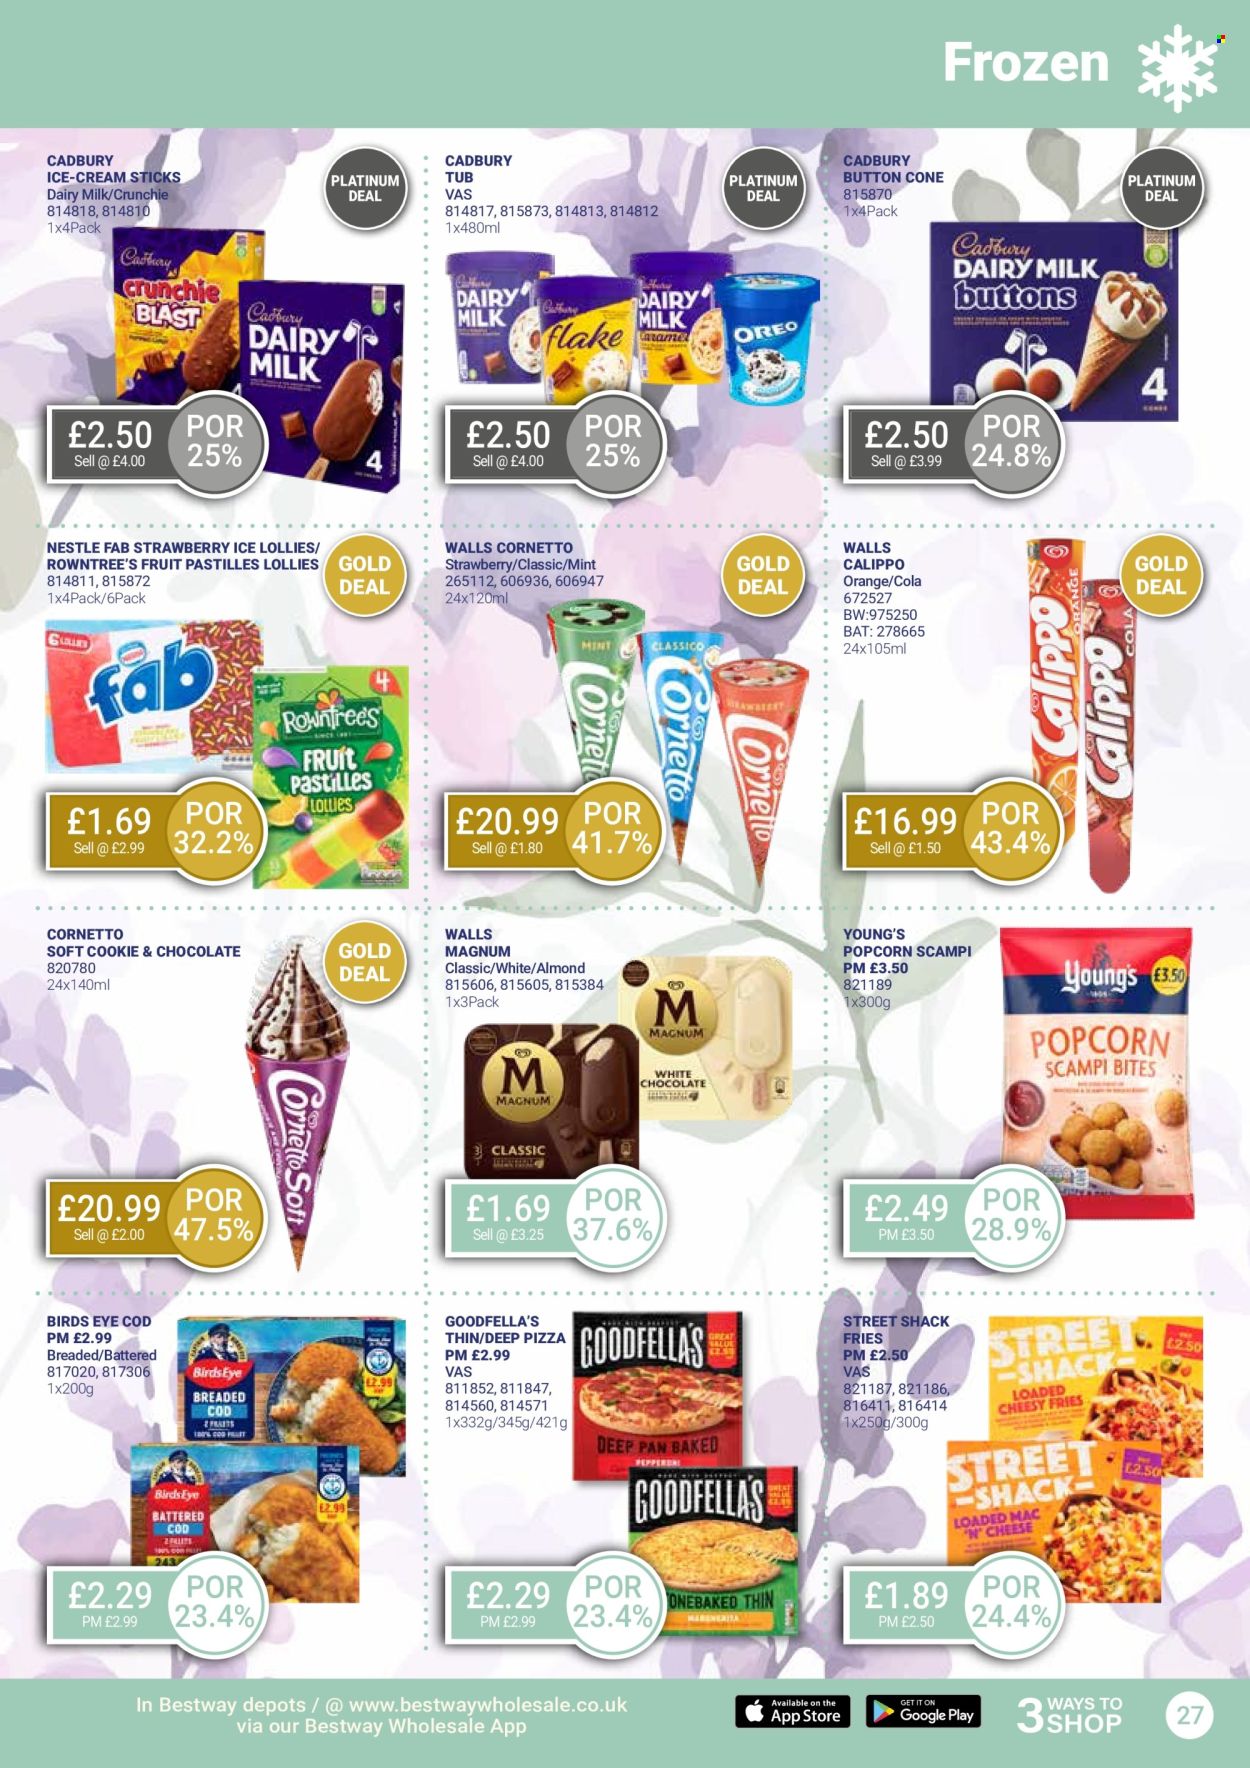 thumbnail - Bestway offer  - 26/04/2024 - 23/05/2024 - Sales products - cod, pizza, Bird's Eye, Magnum, ice cream, ice cream bars, Cornetto, Calippo, ice lolly, potato fries, cookies, Nestlé, Cadbury, pastilles, Dairy Milk, lollies, popcorn, mint, Fab. Page 27.